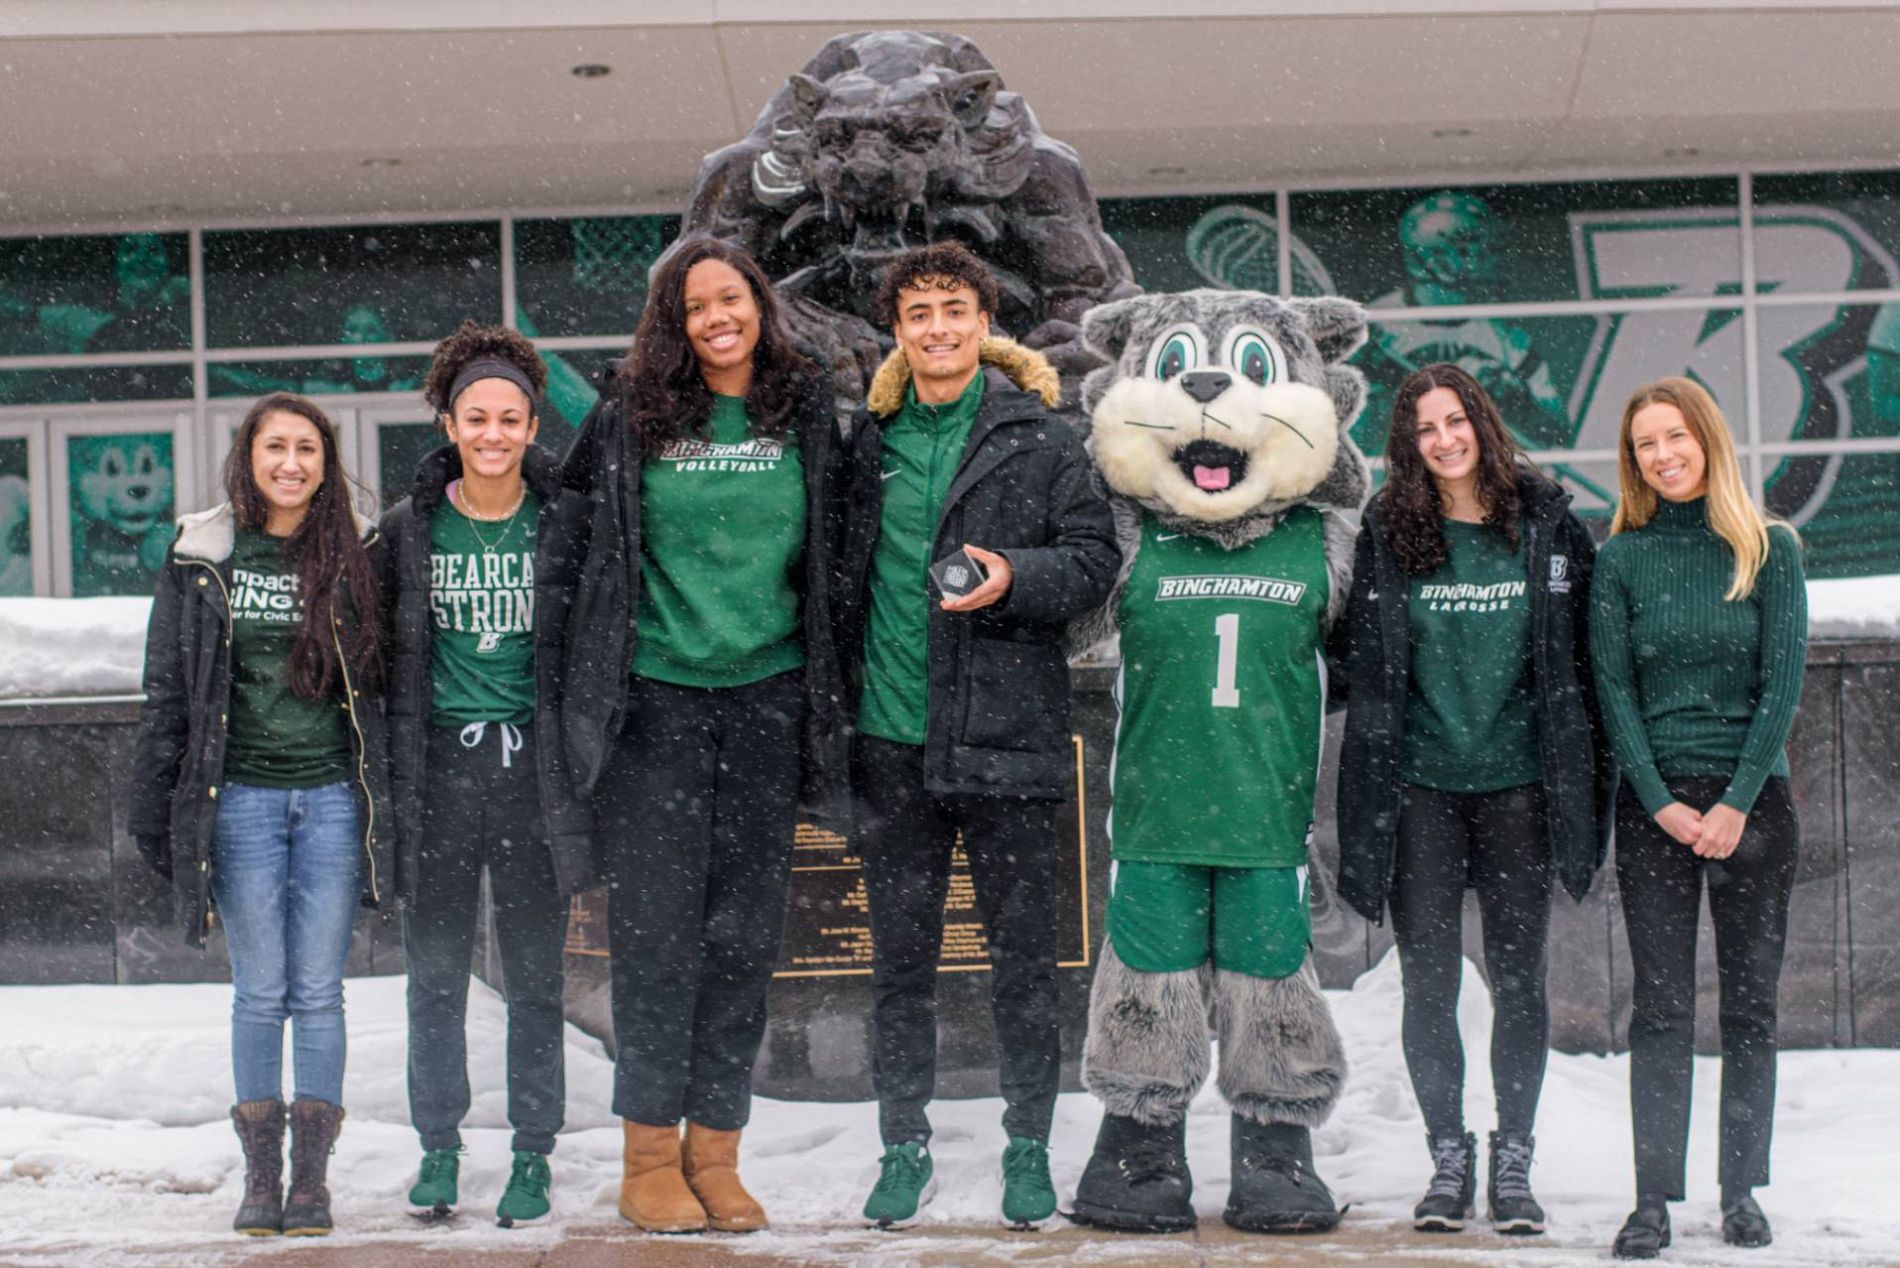 Binghamton University receives 2020 Highest Voter Registration Rate in America East Conference photo